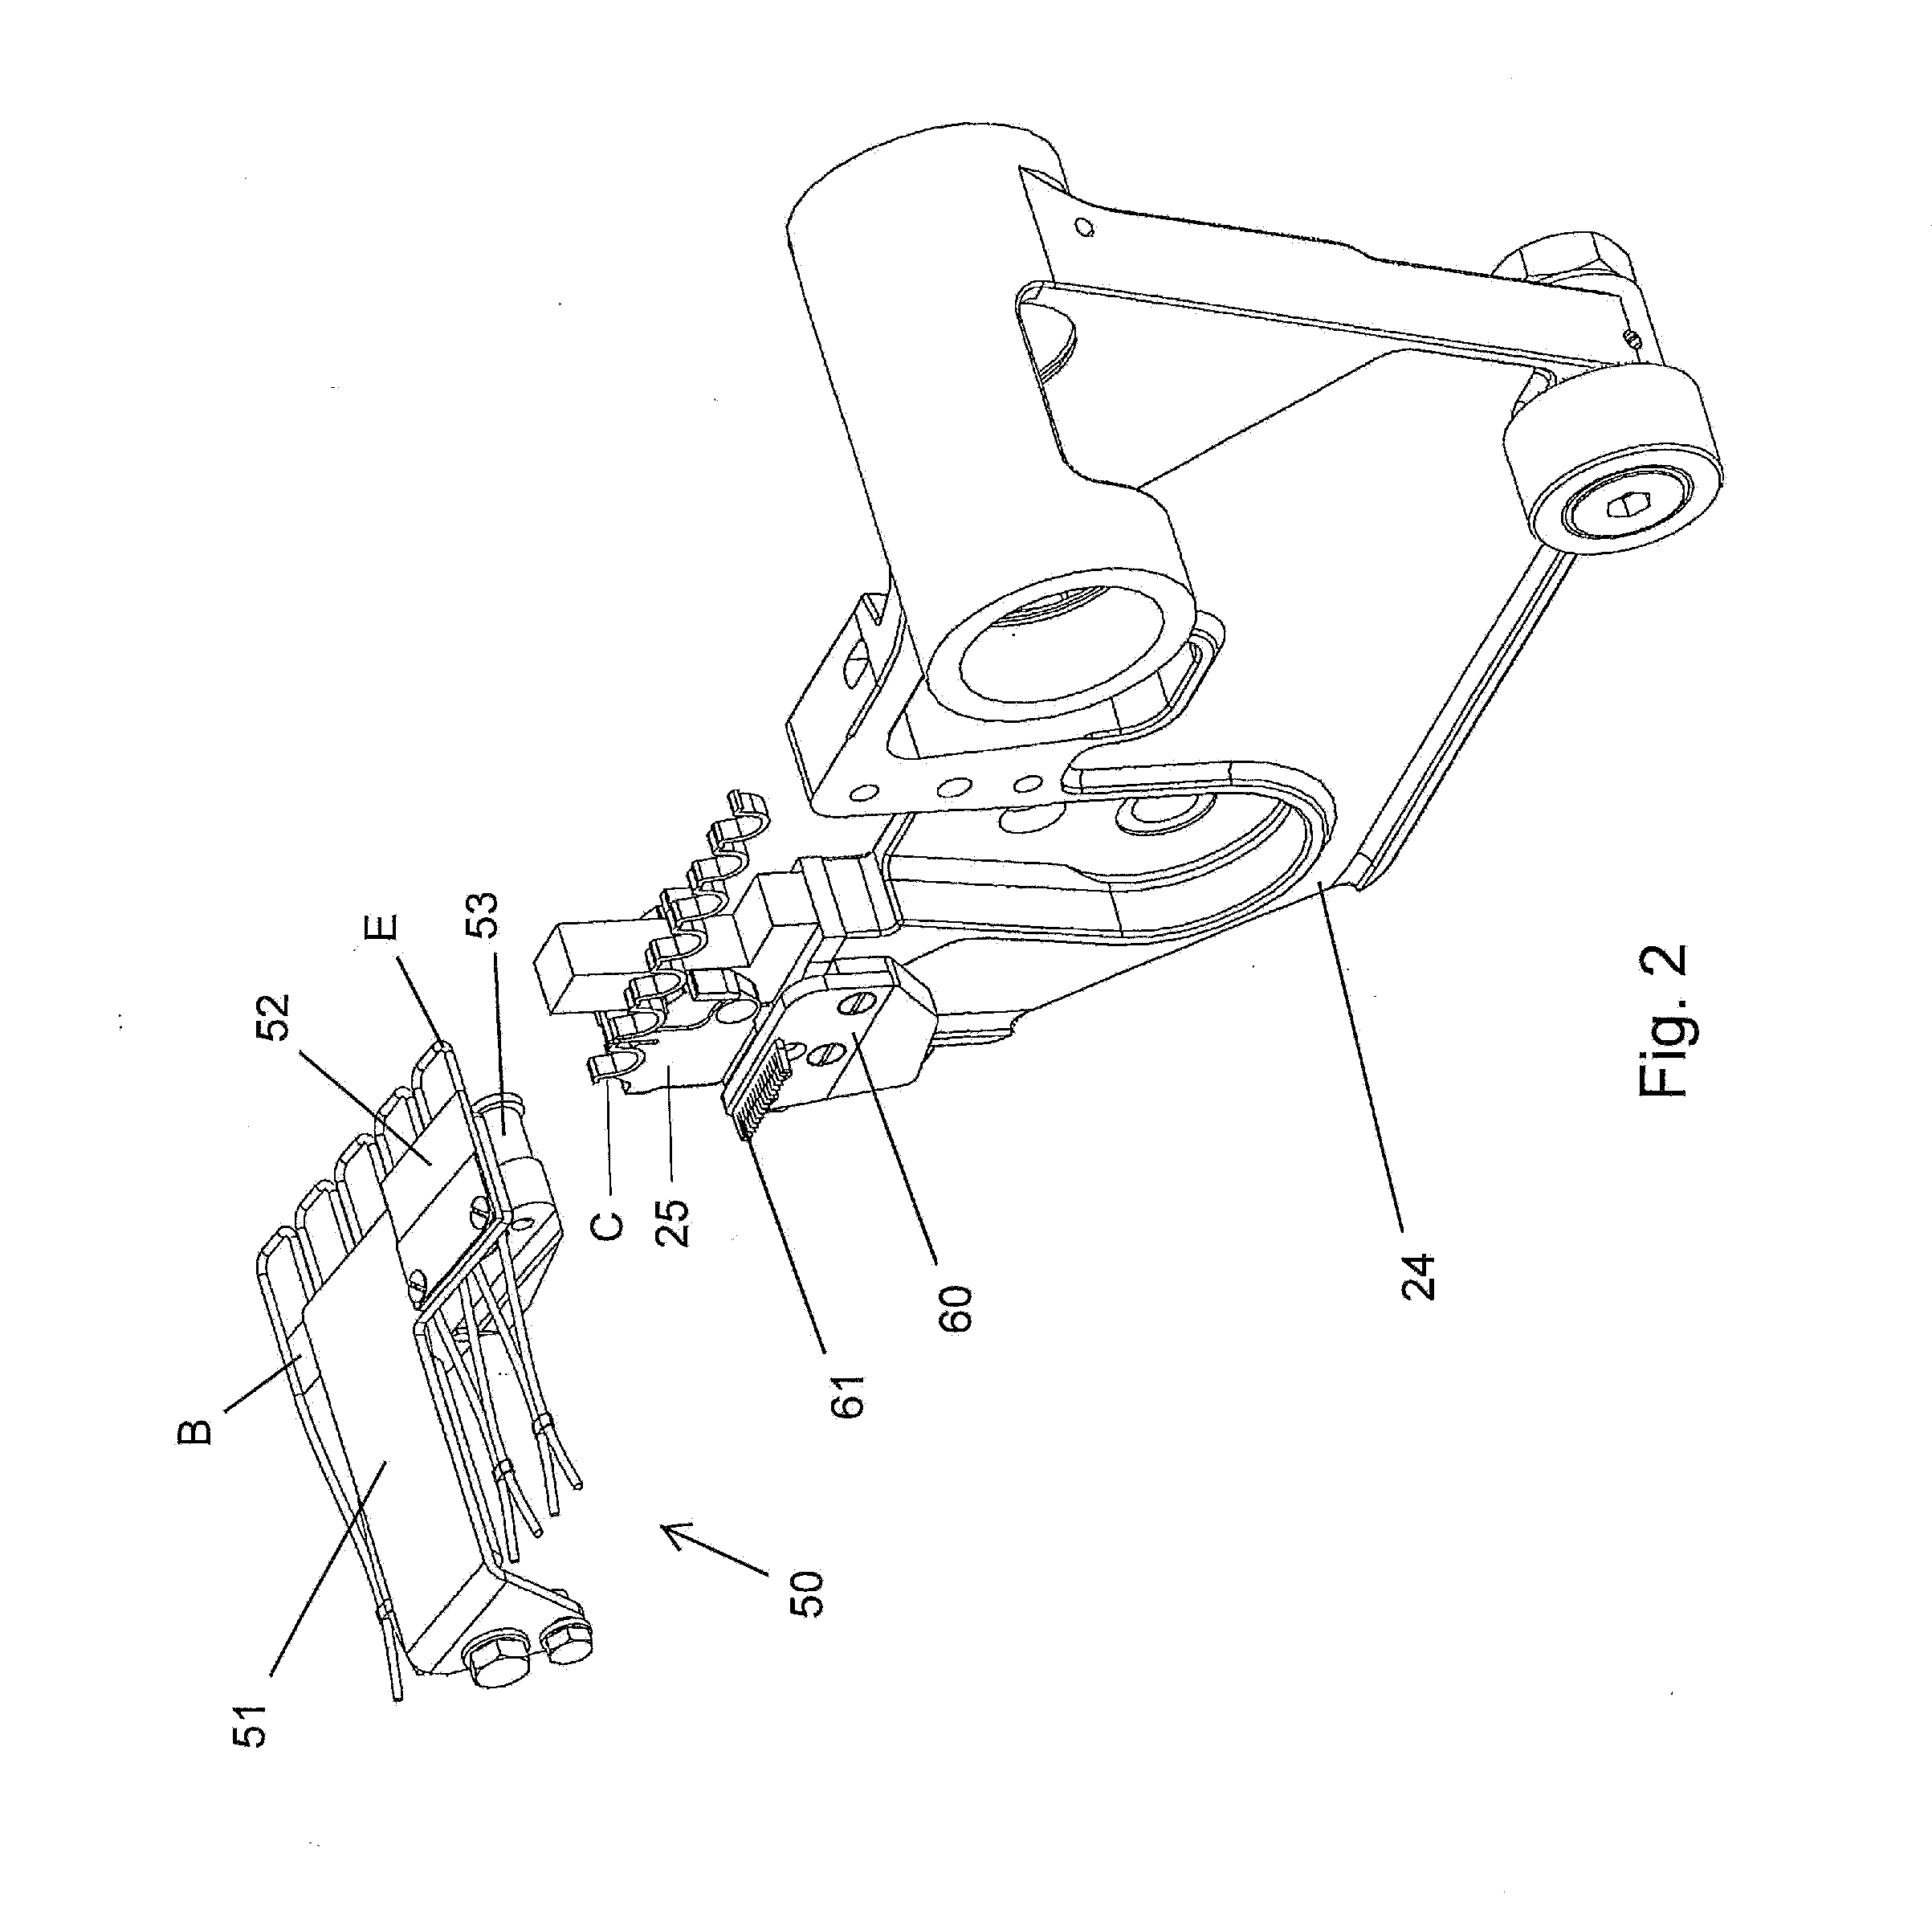 Clipping machine with improved handling of suspension elements